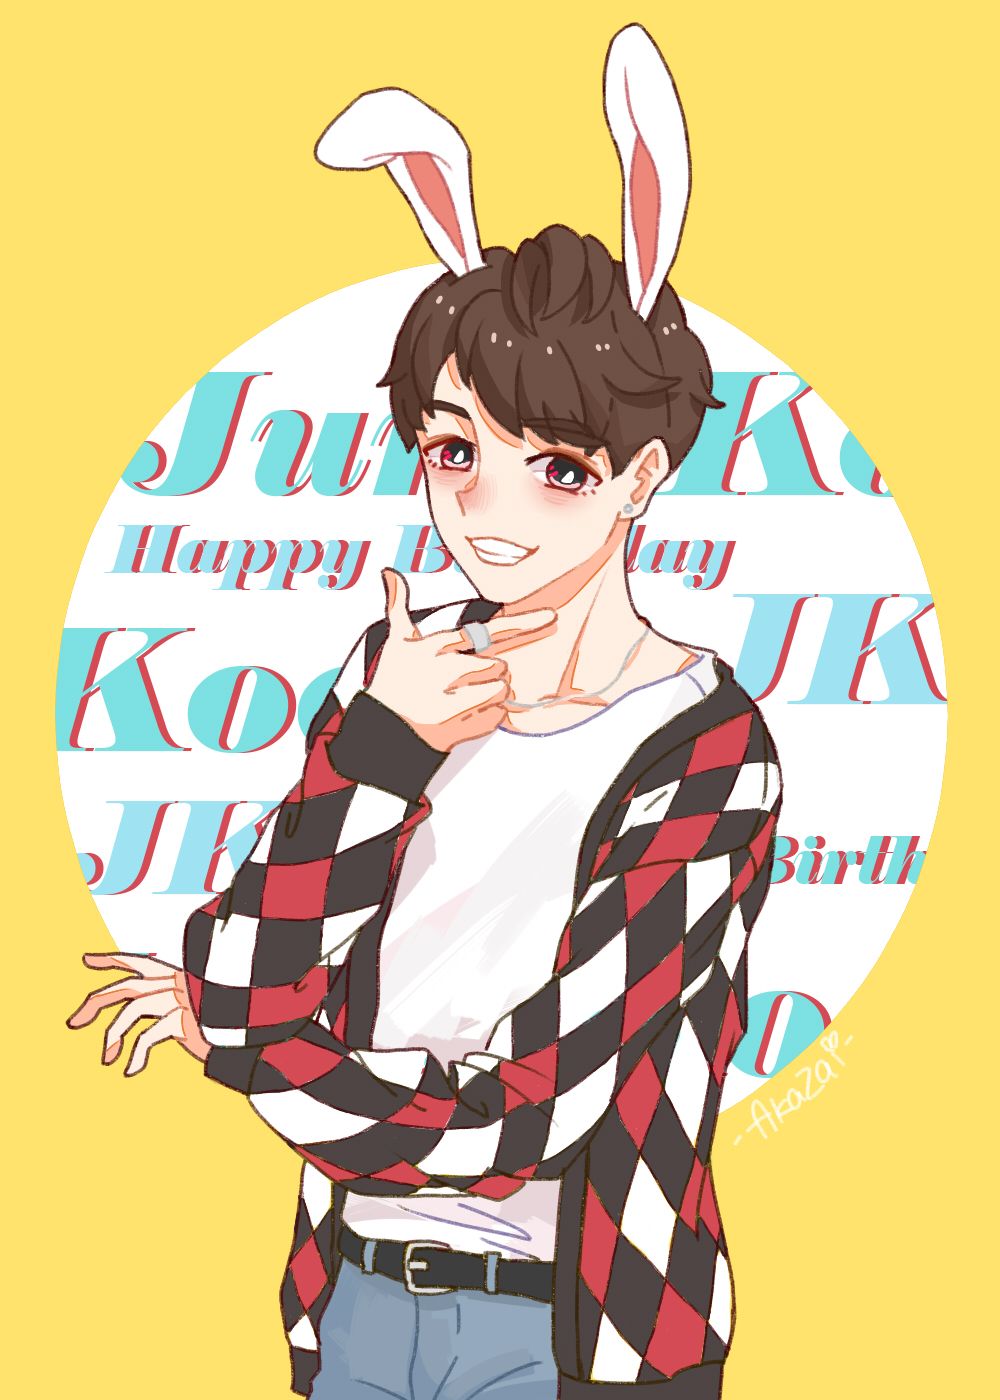 ⁷  en Twitter jungkook as our anime girl uwu  a thread  httpstco3Gn3eP0cpa  Twitter